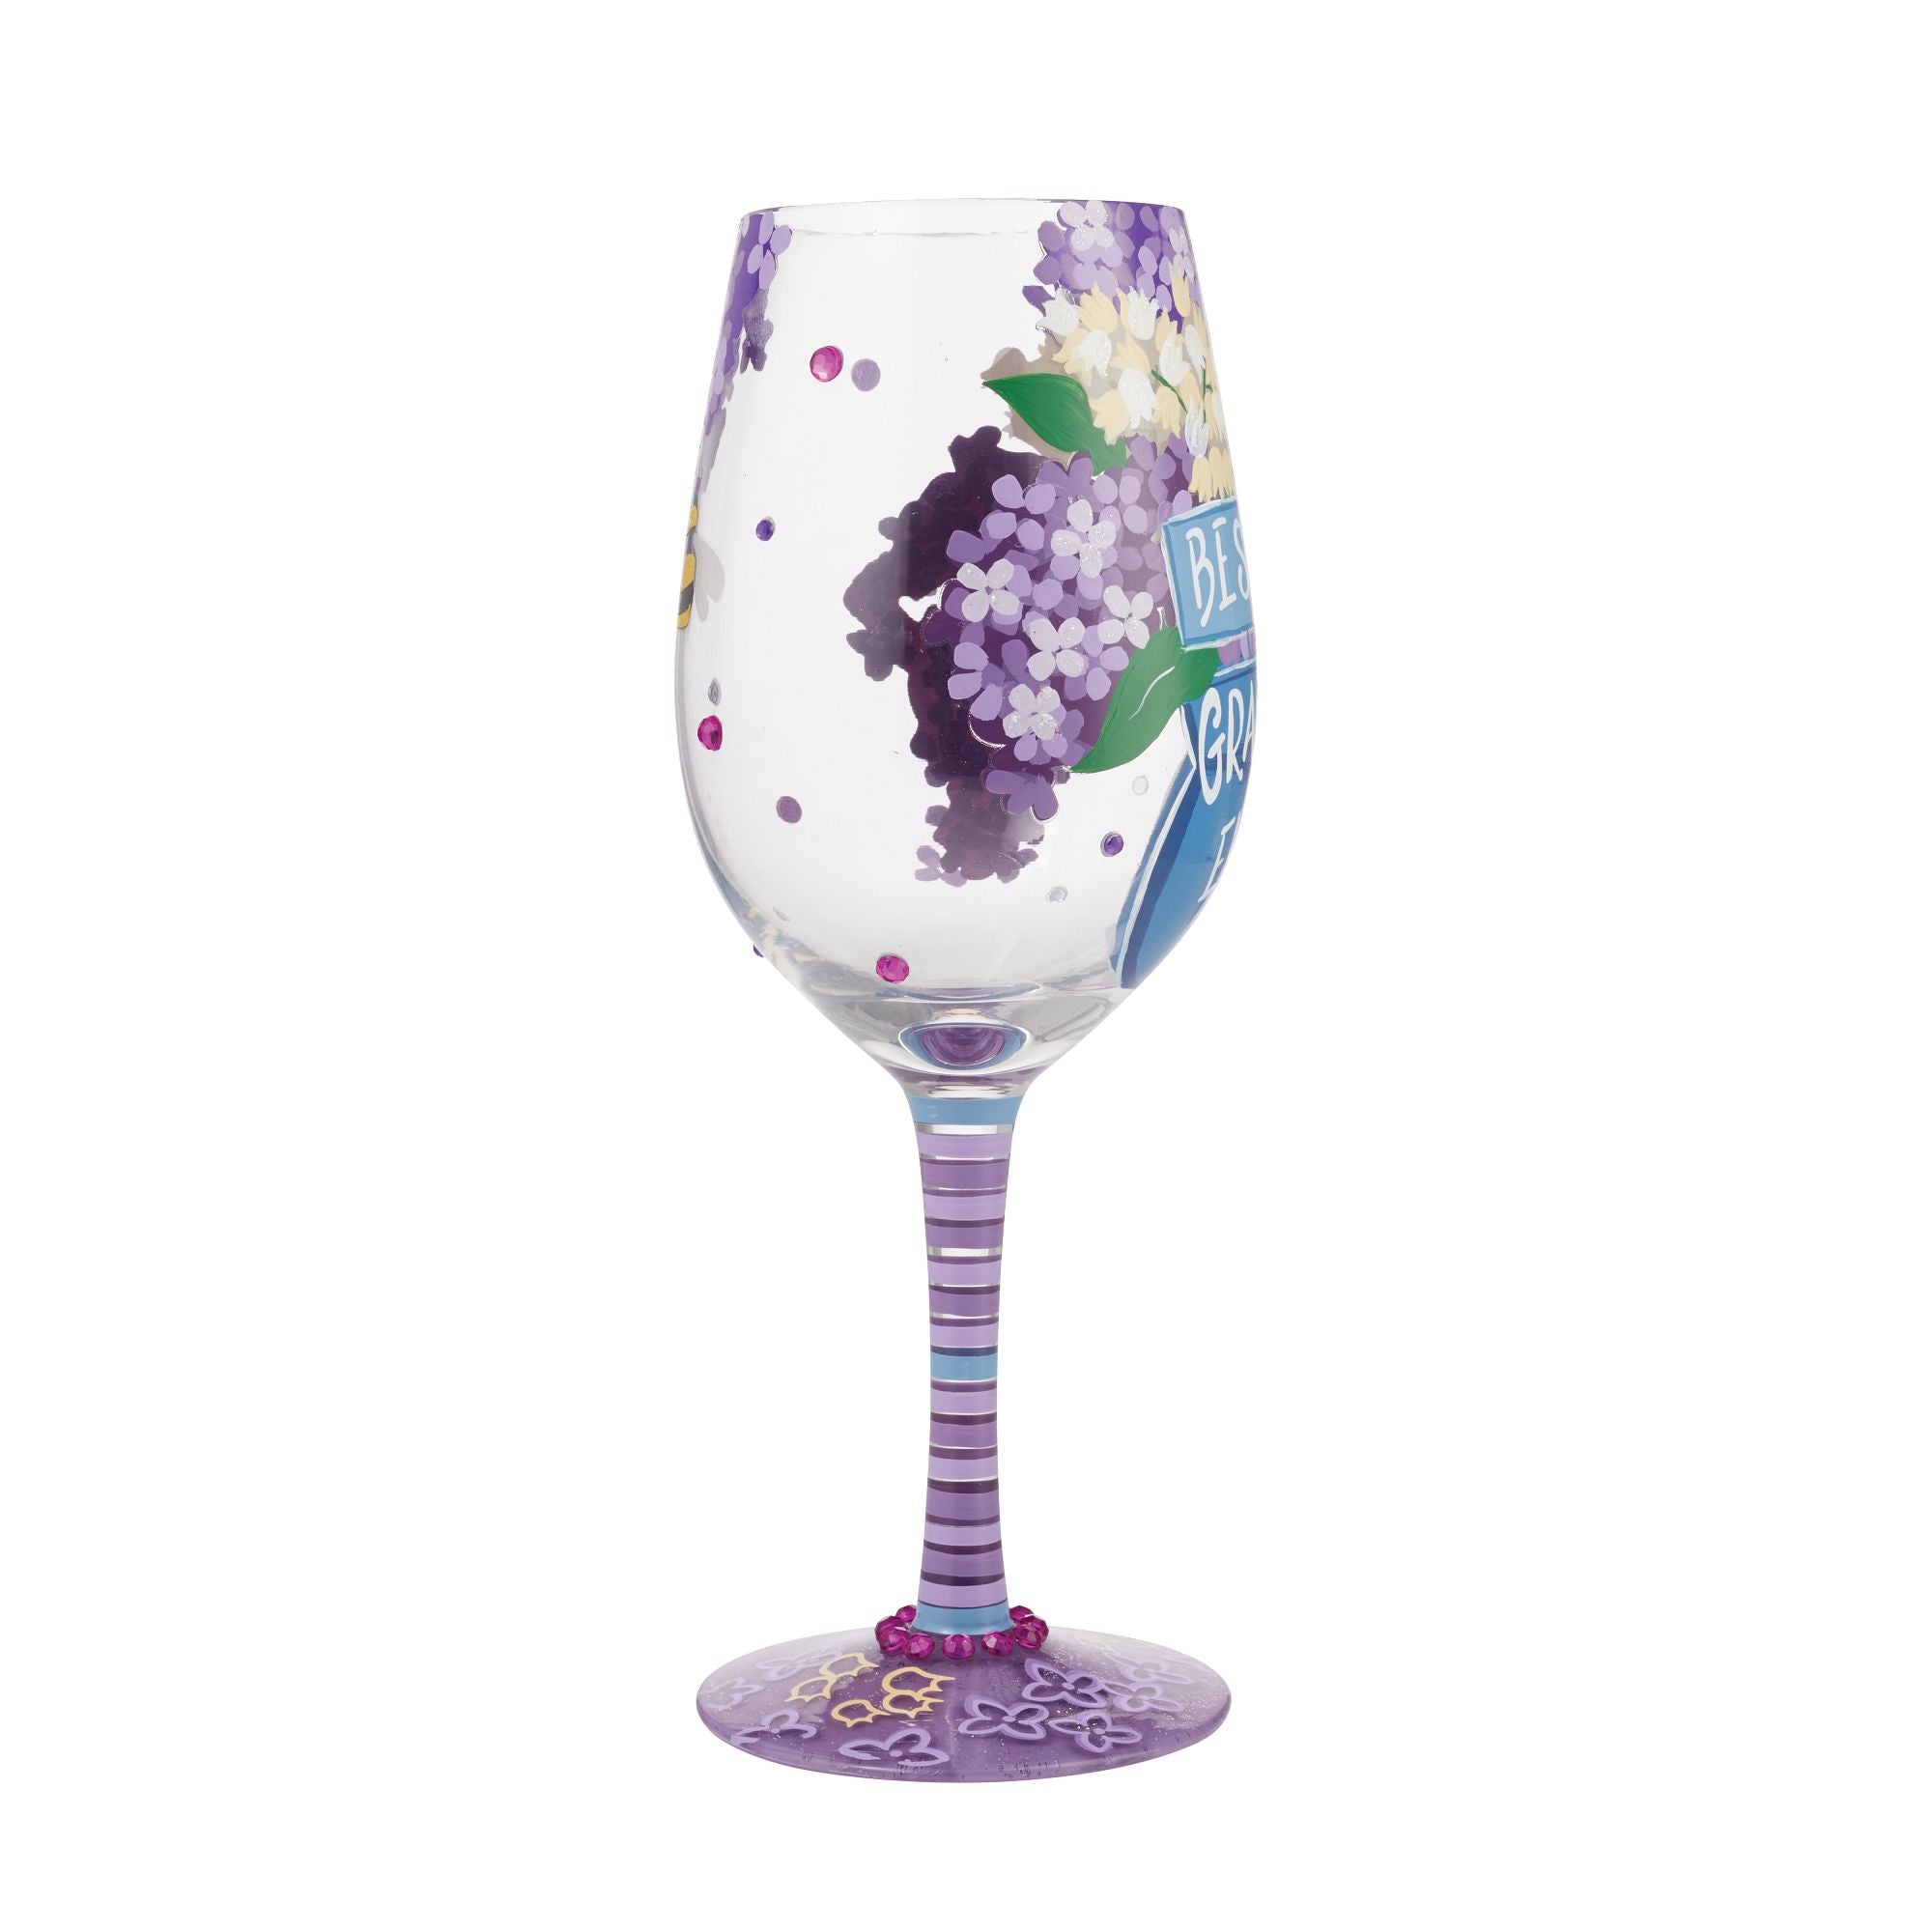 Hand Painted Lavender Flower Stemless Wine Glasses - Set of 4 - 15 ounce